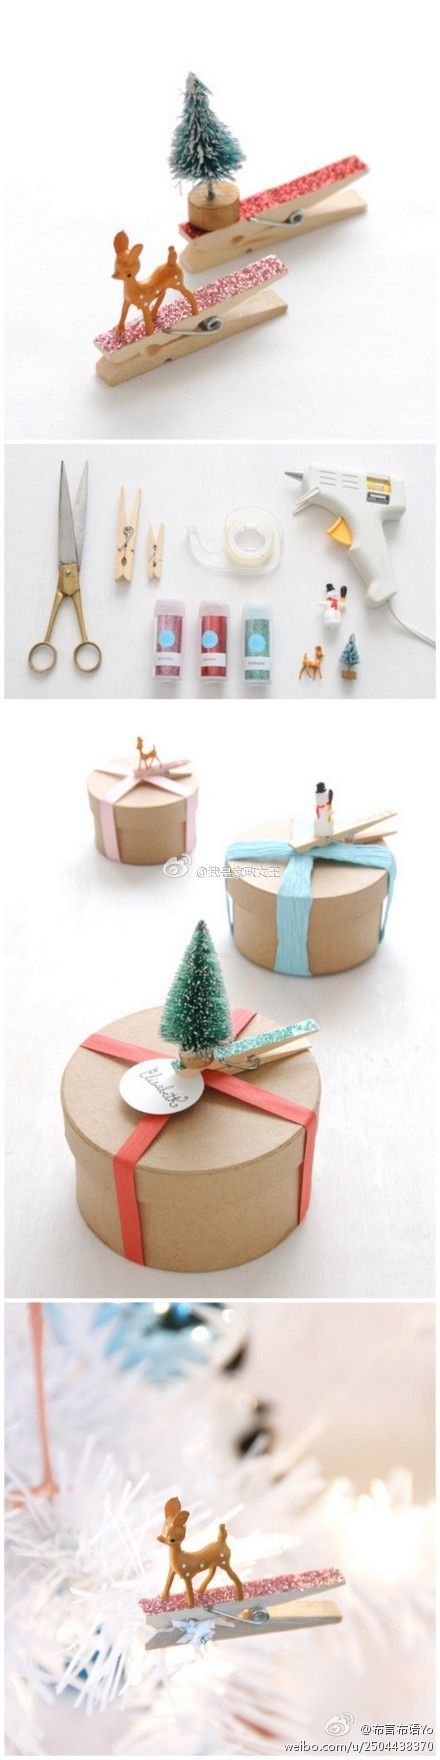 Glittery gift pins made from old ornaments and clothes pins!